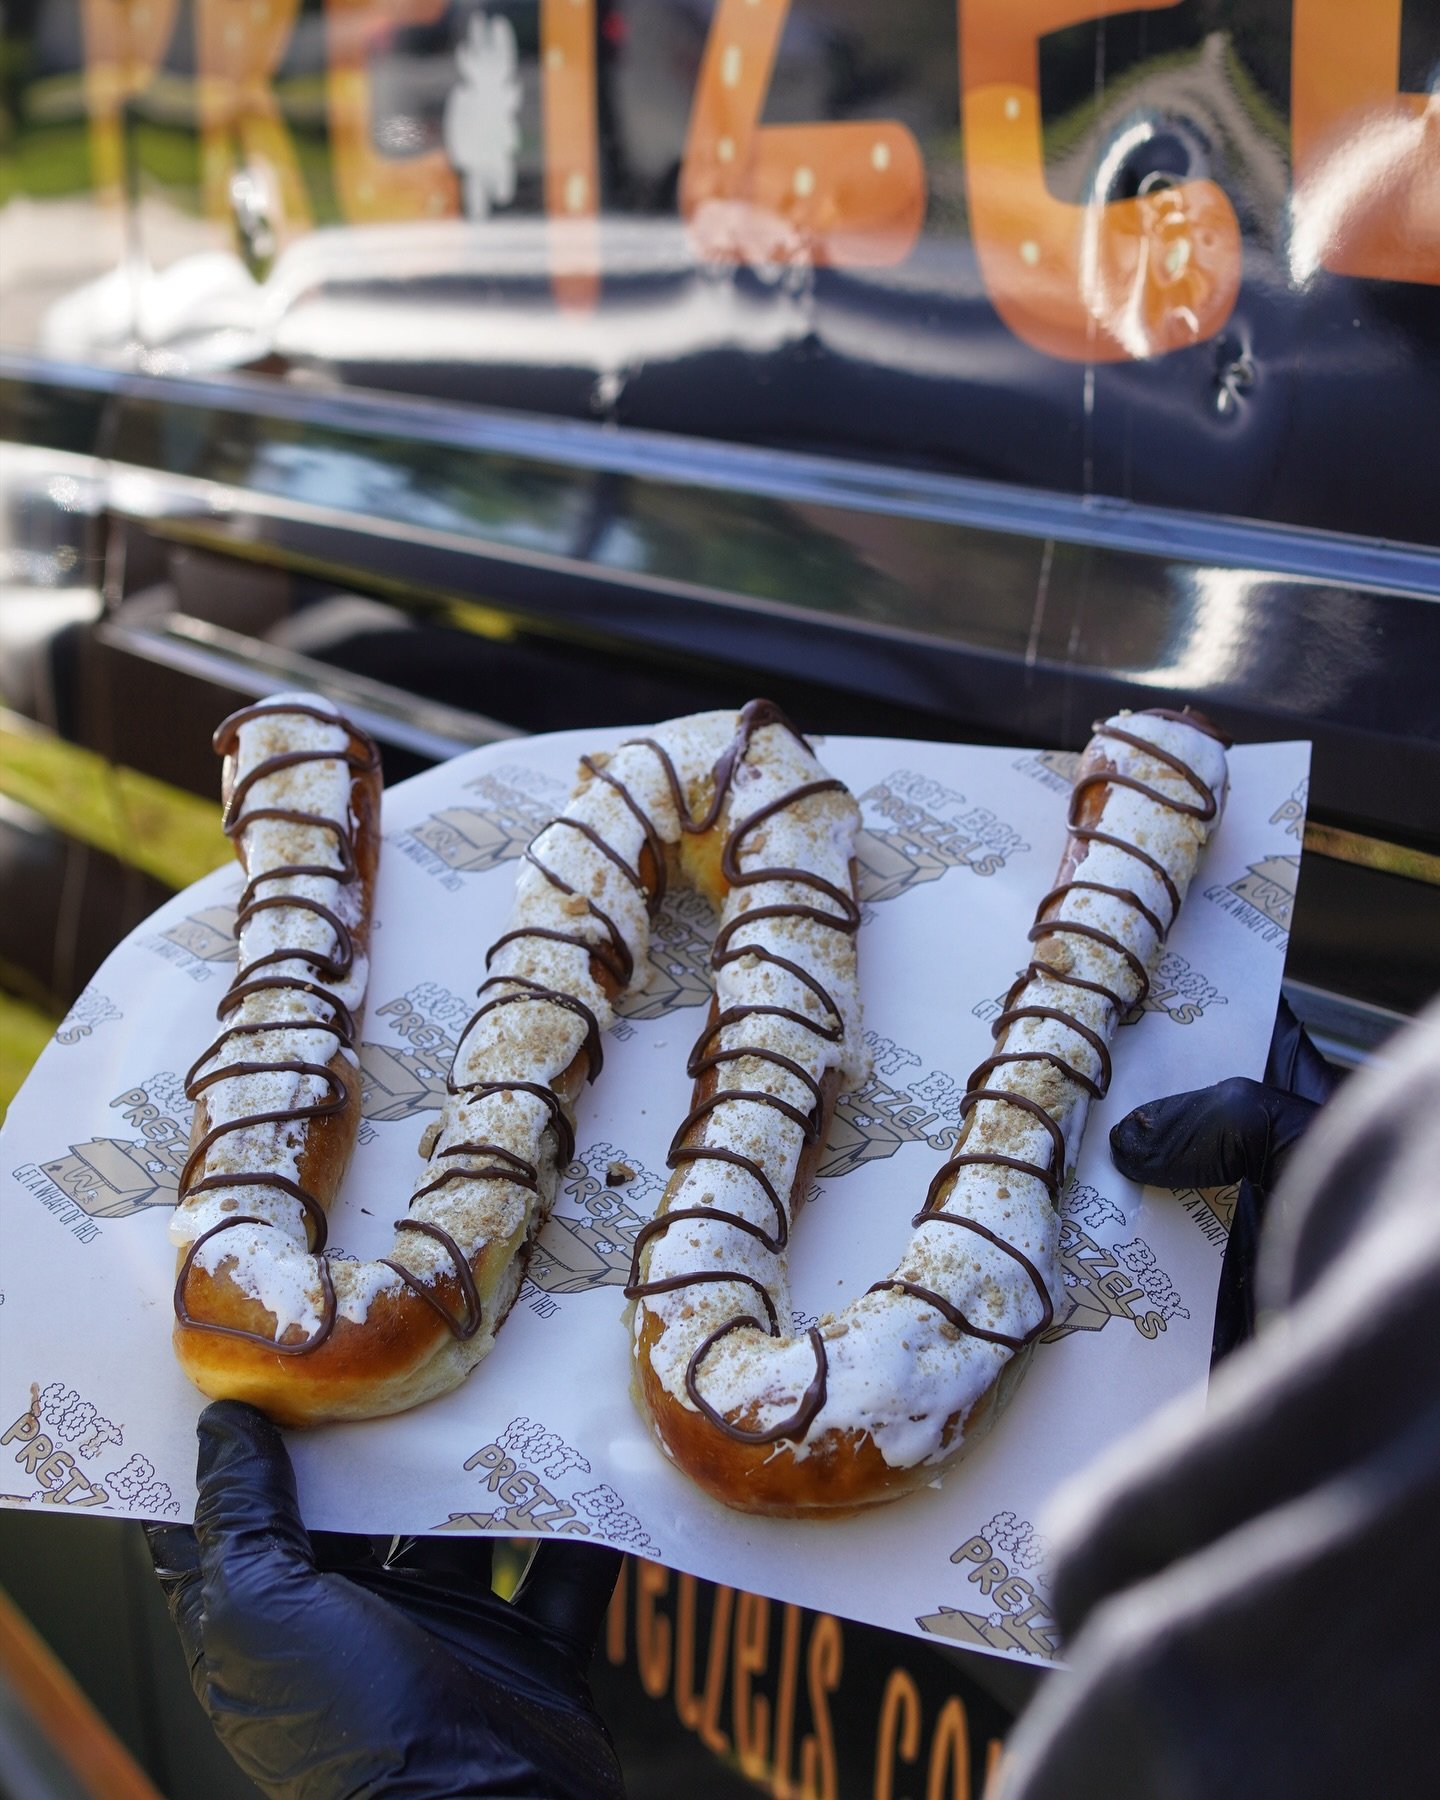 Picture perfect S&rsquo;mores Whaff. 🥨🍫🏕️🔥

Be sure to grab some napkins with this one, can be a little messy.

#HotBoxPretzels #pretzels #Jacksonvillepretzels #softhotpretzels #freshpretzels #Whaff #queso #cinnamonpretzels #saltedpretzels #softp